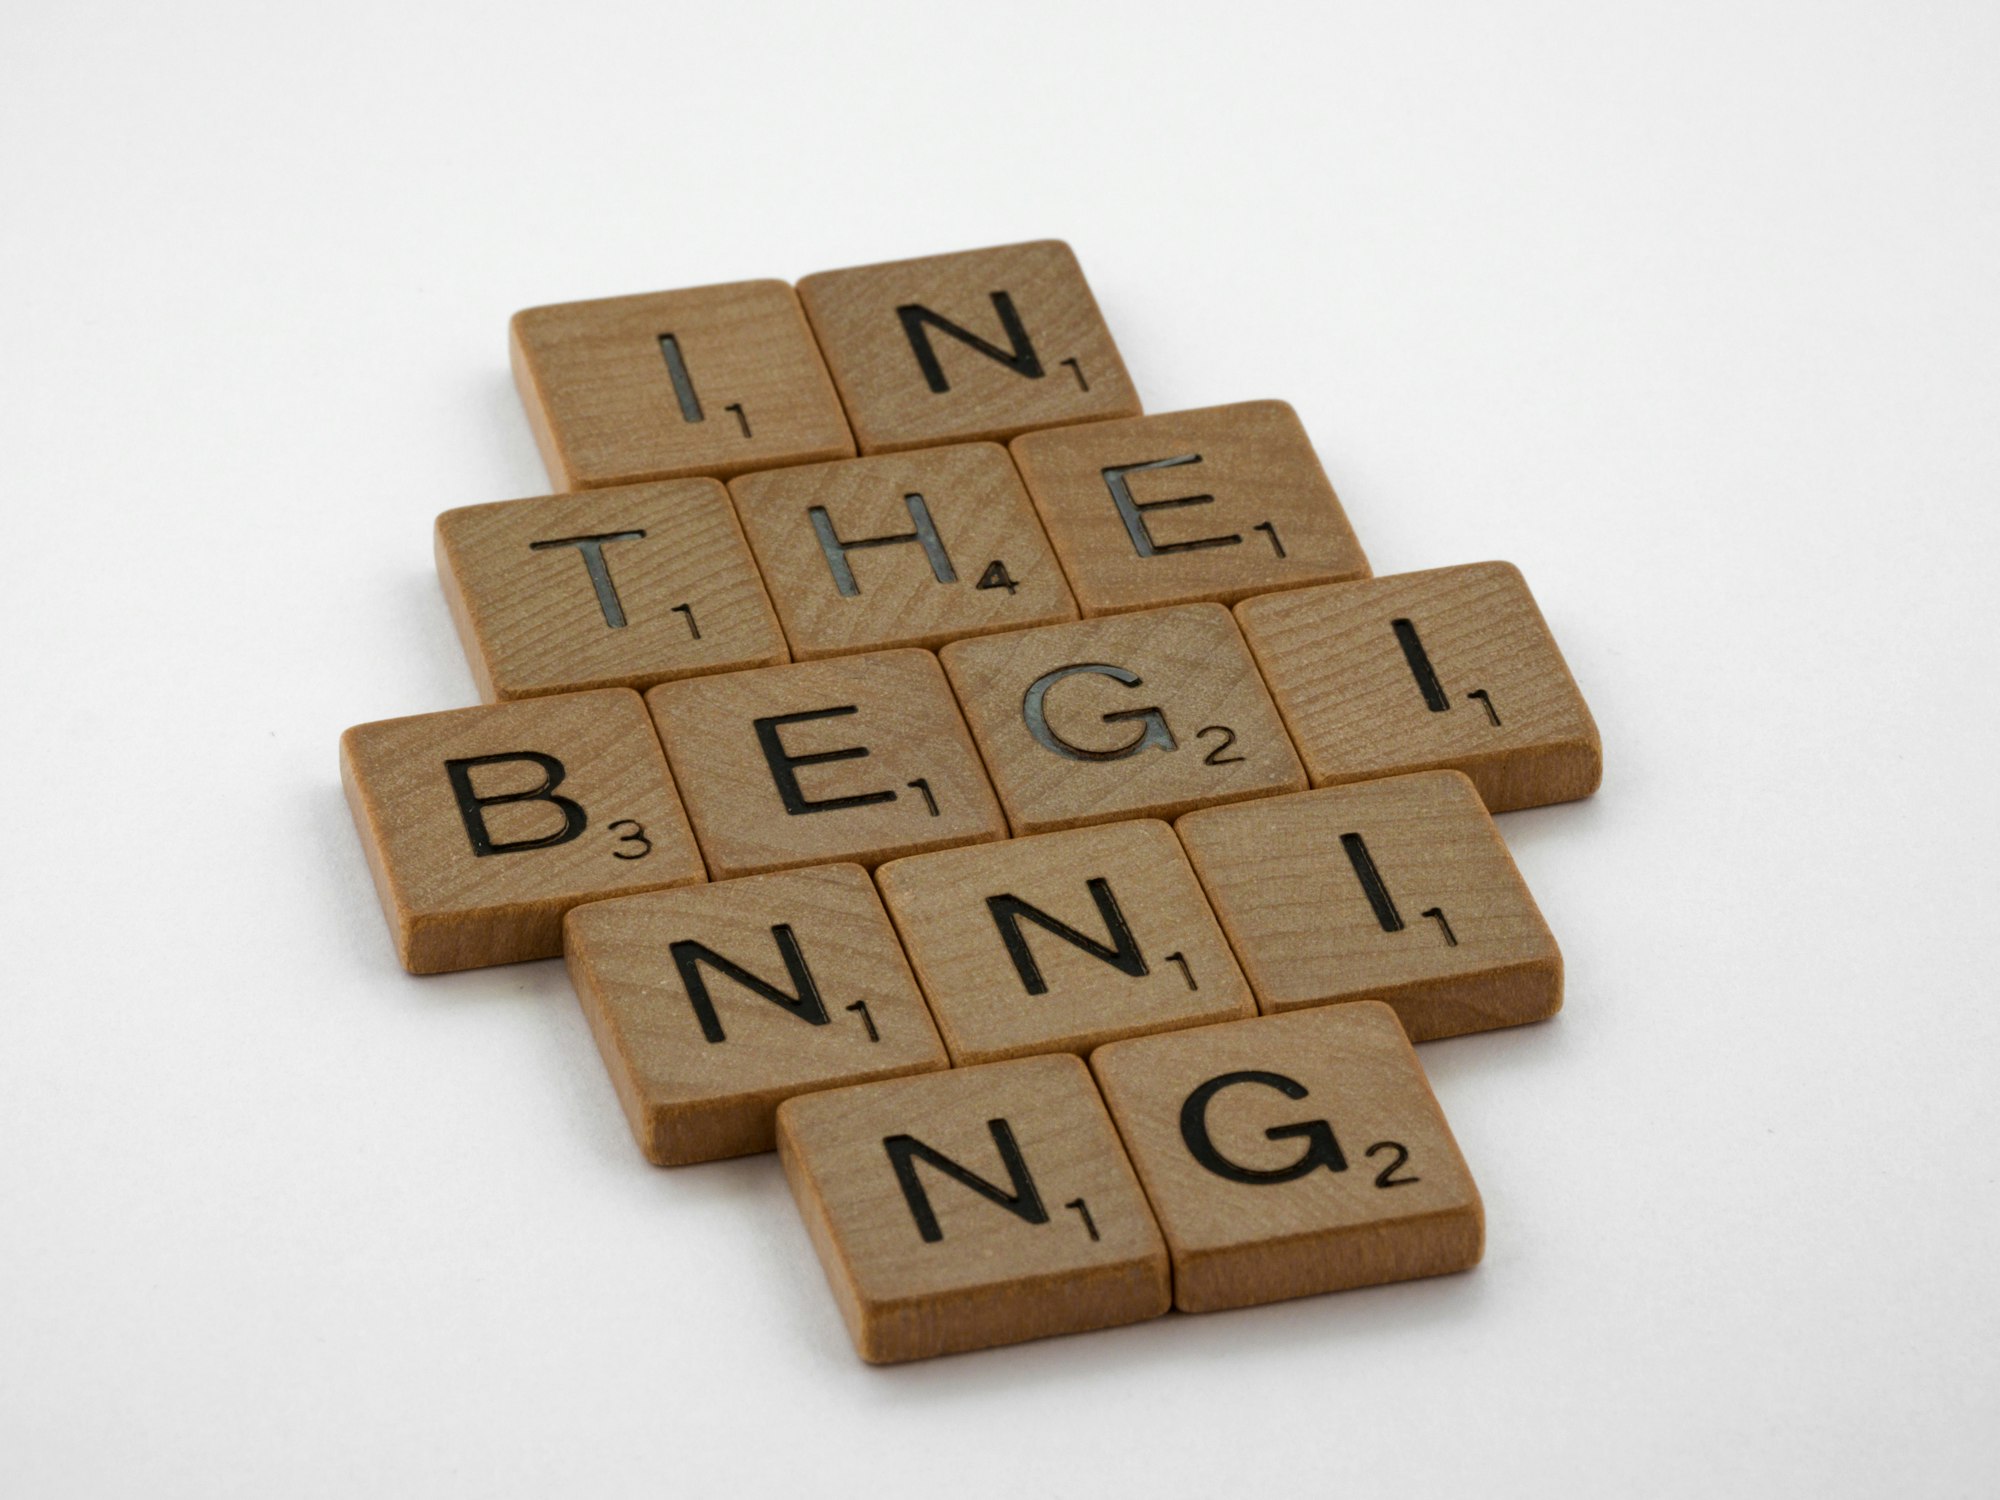 scrabble, scrabble pieces, lettering, letters, wood, scrabble tiles, white background, words, quote, letters, type, typography, design, layout, focus, bokeh, blur, camera, photography, images, image, in the beginning, genesis, genesis chaper 1, bible, creation, begin, start, make a start, book of genesis, 